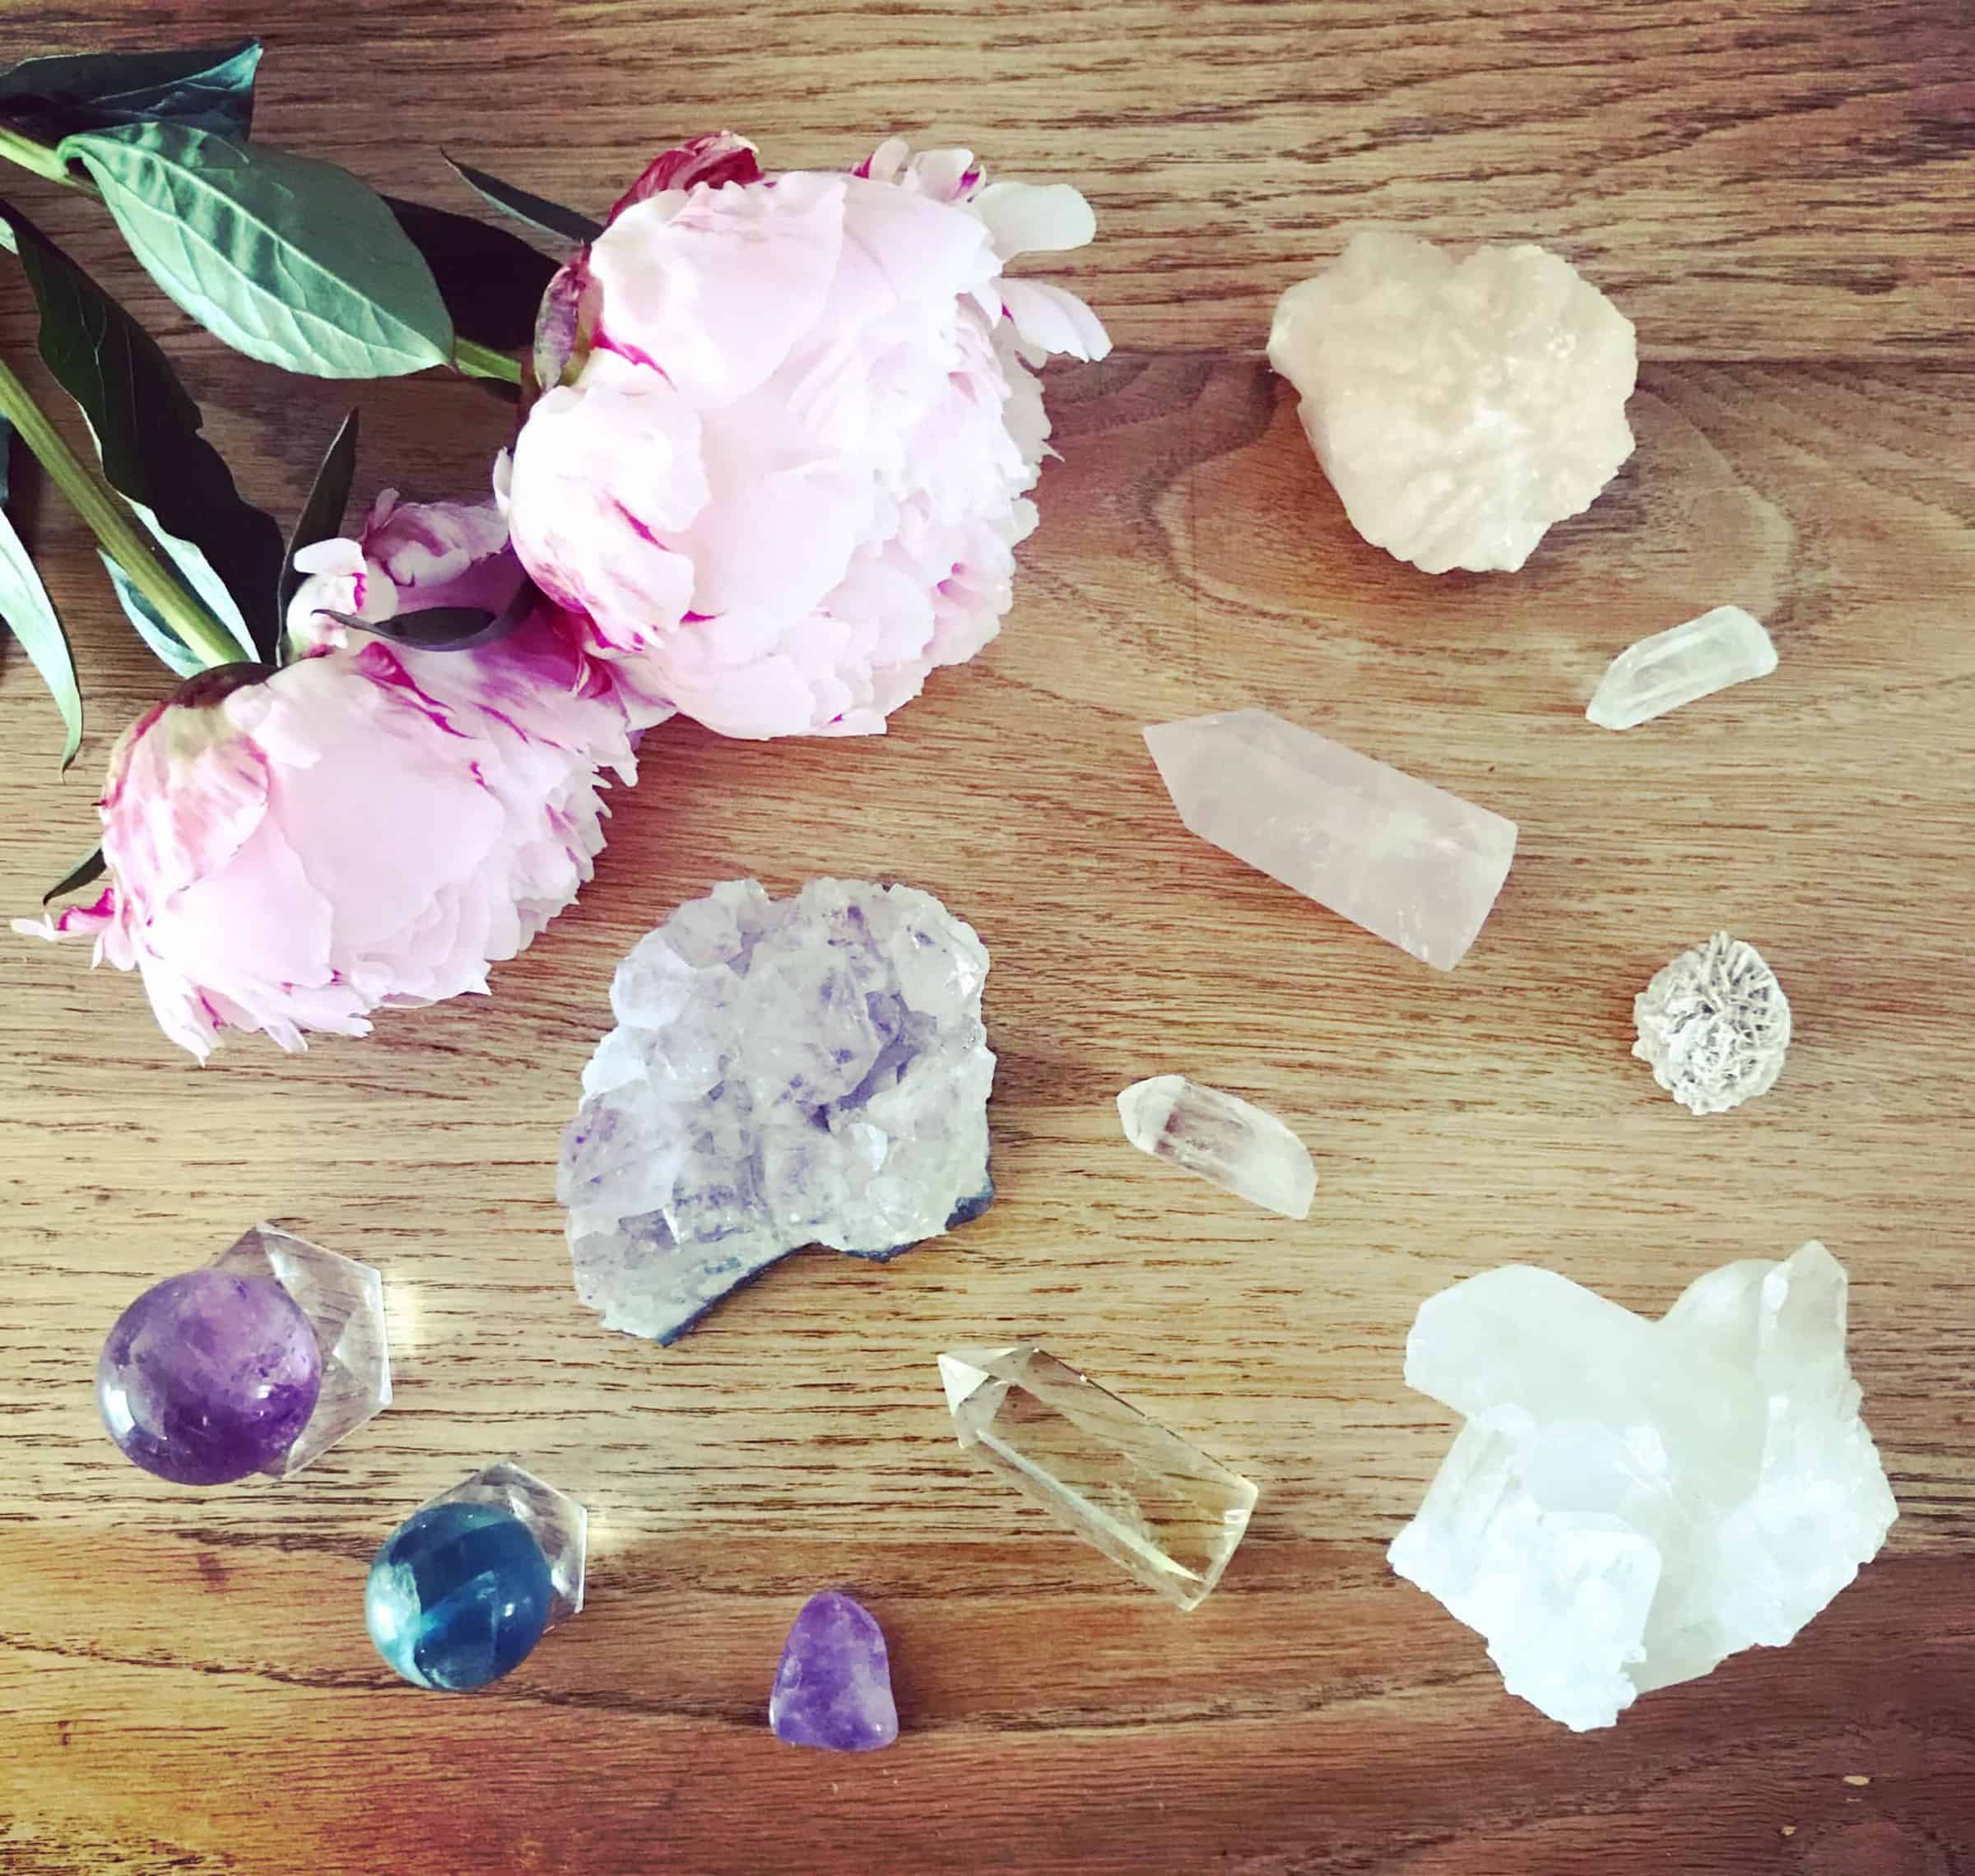 The power of crystal healing